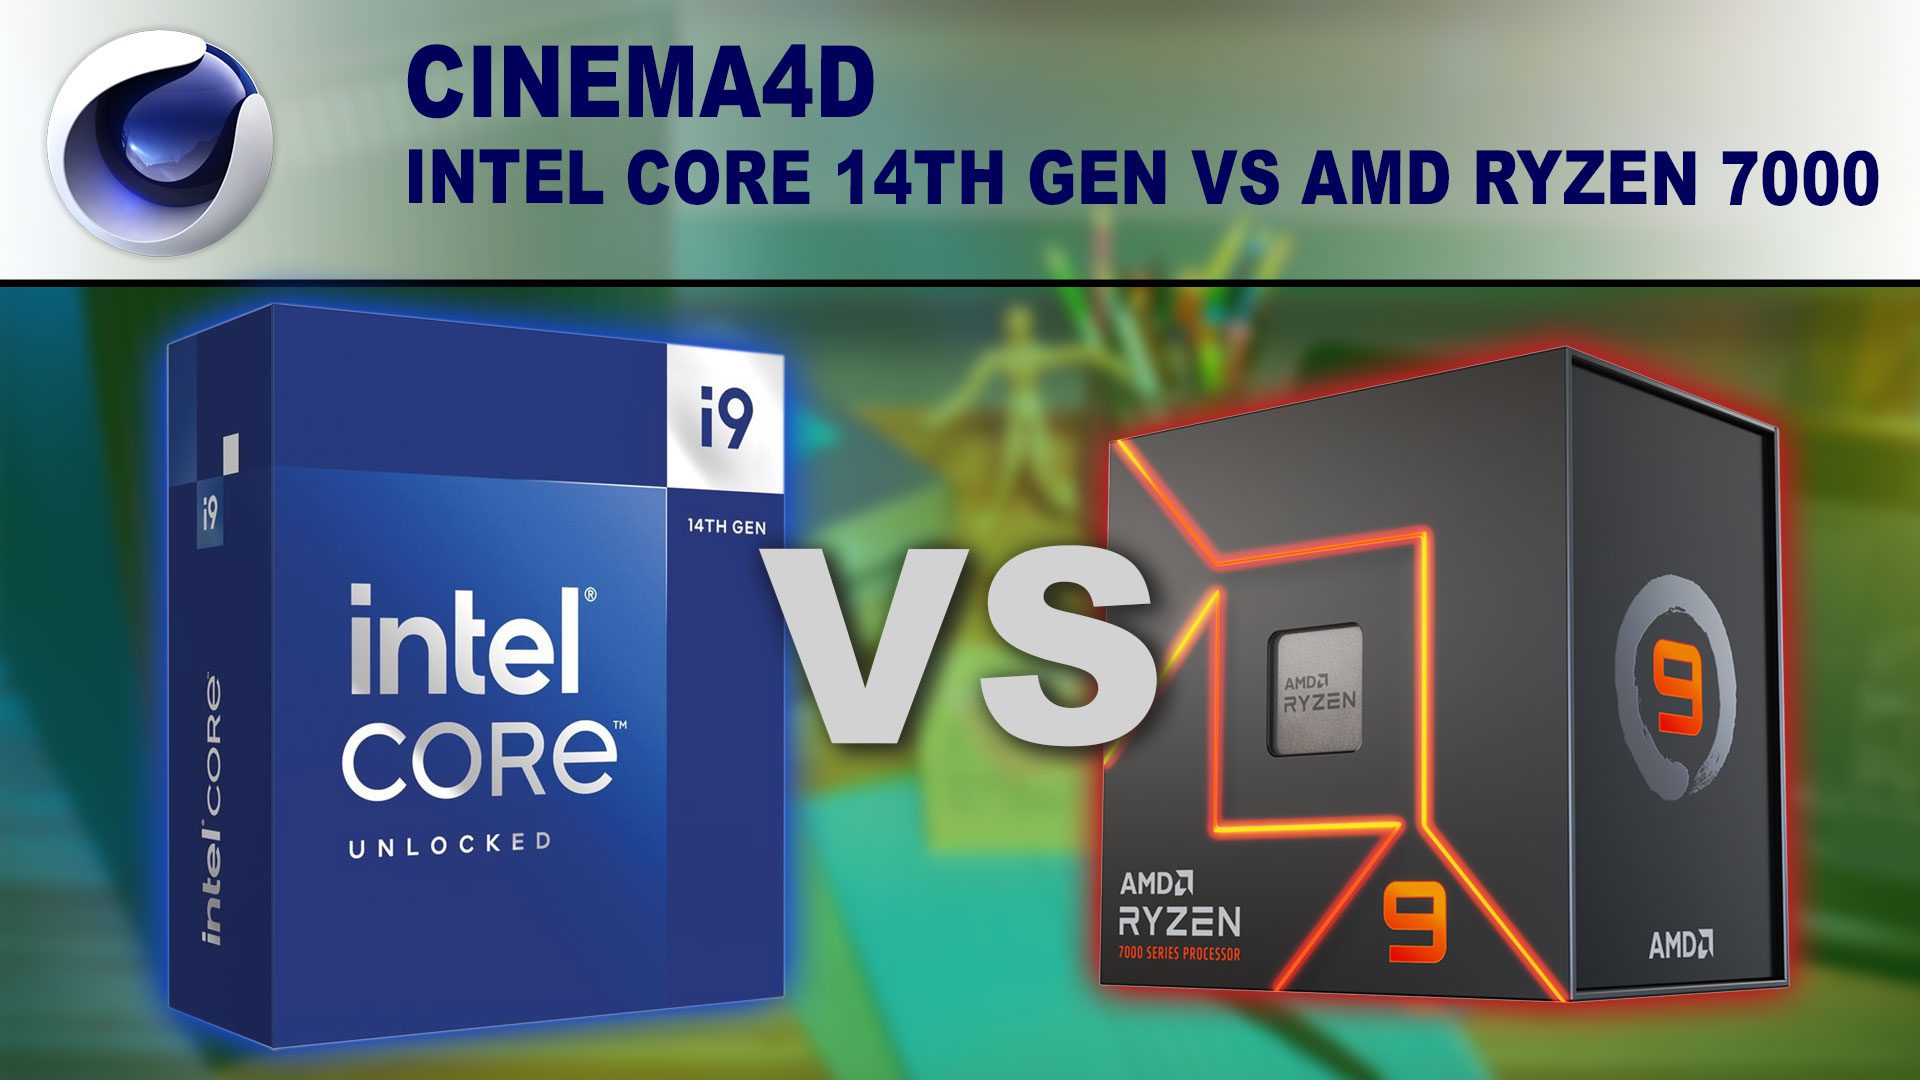 Decorative Image: Intel Core i9-14900K box and AMD Ryzen 9 7950X box on a green background with the words "VS" between them and the title "Cinema 4D" above them.